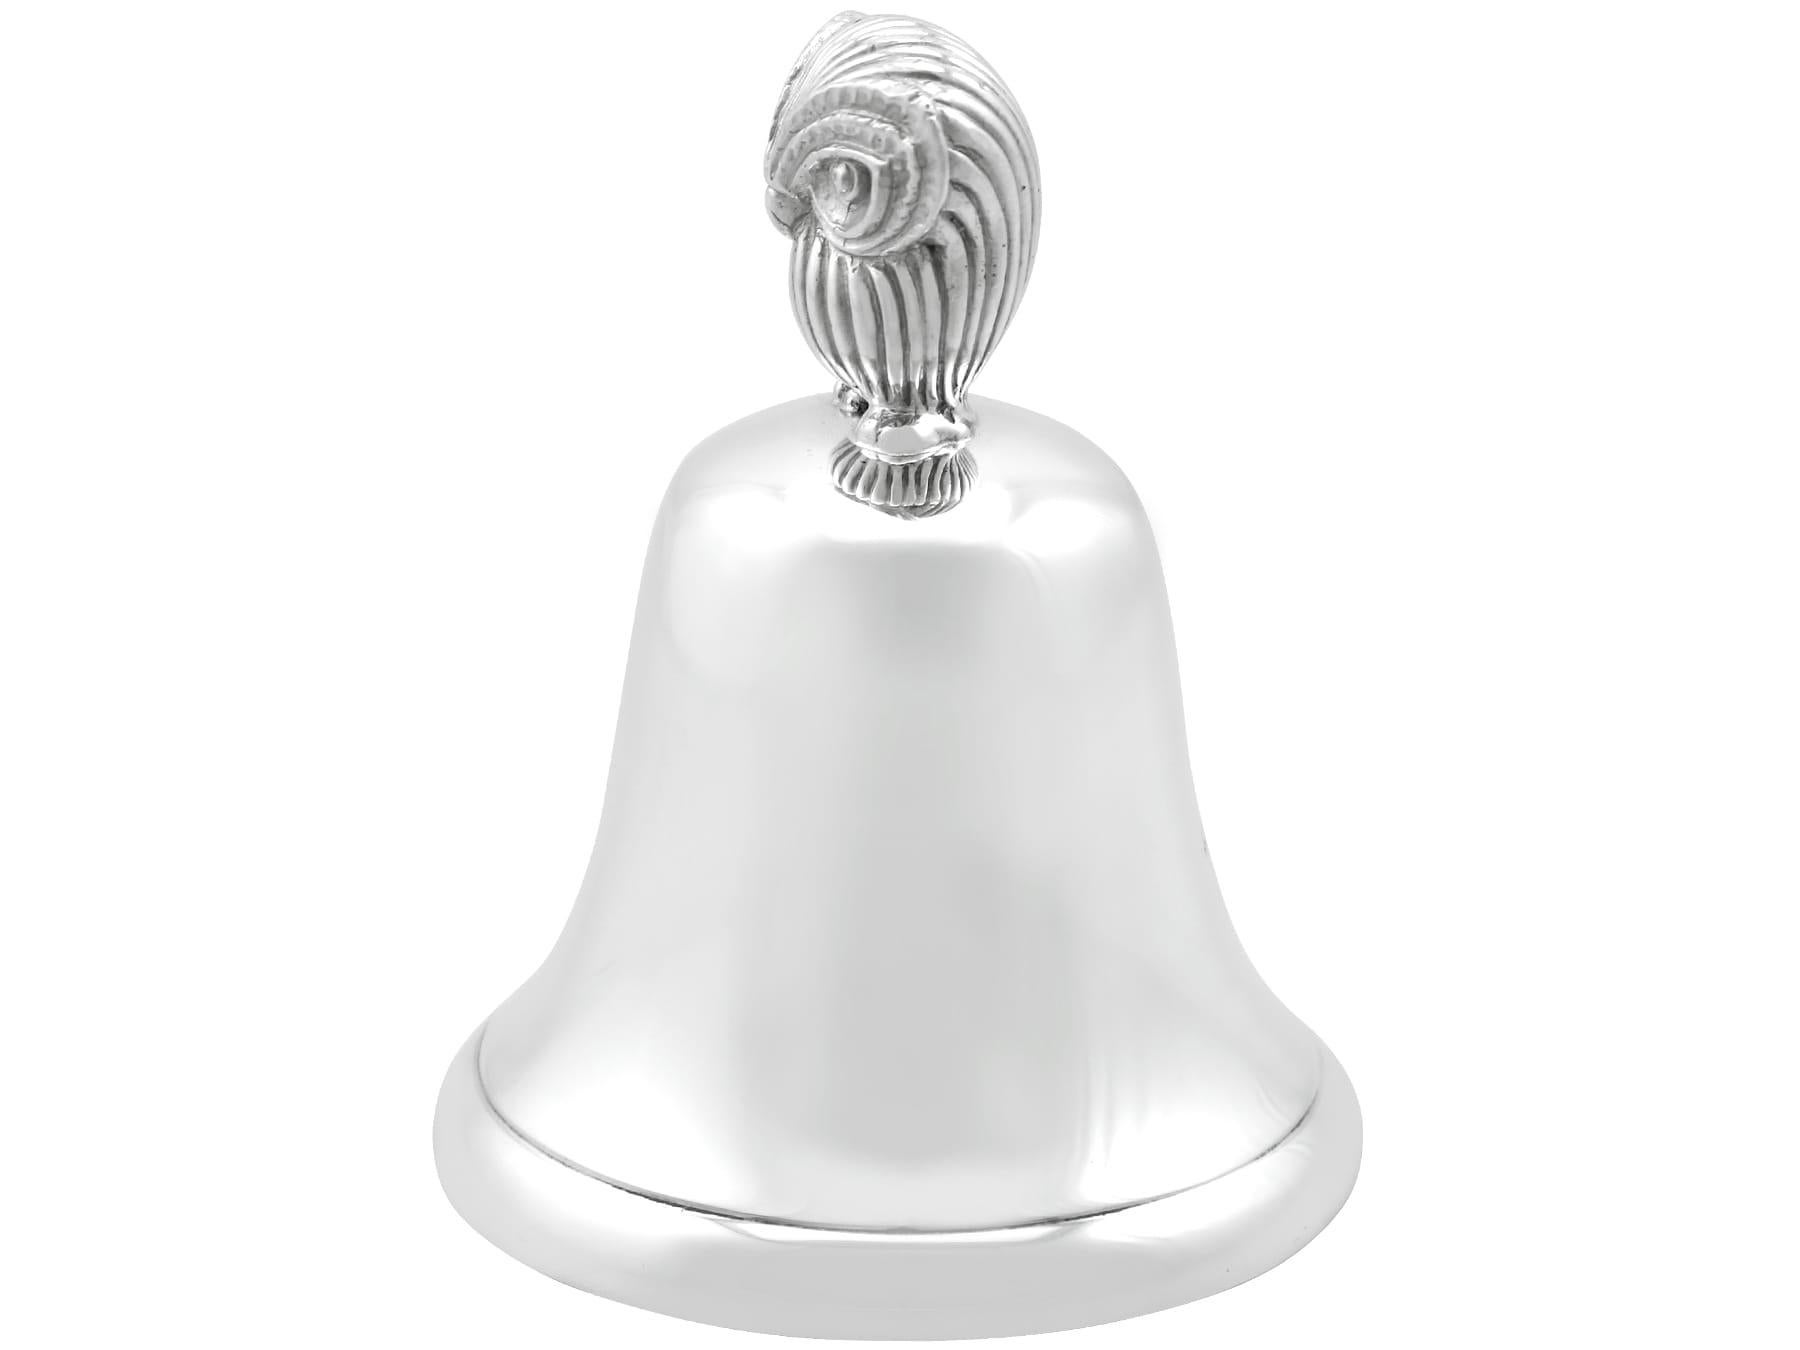 An exceptional, fine and impressive vintage English sterling silver table bell; an addition to our range of ornamental silverware

This vintage Elizabeth II sterling silver table bell has a plain bell shaped form.

The surface of this vintage